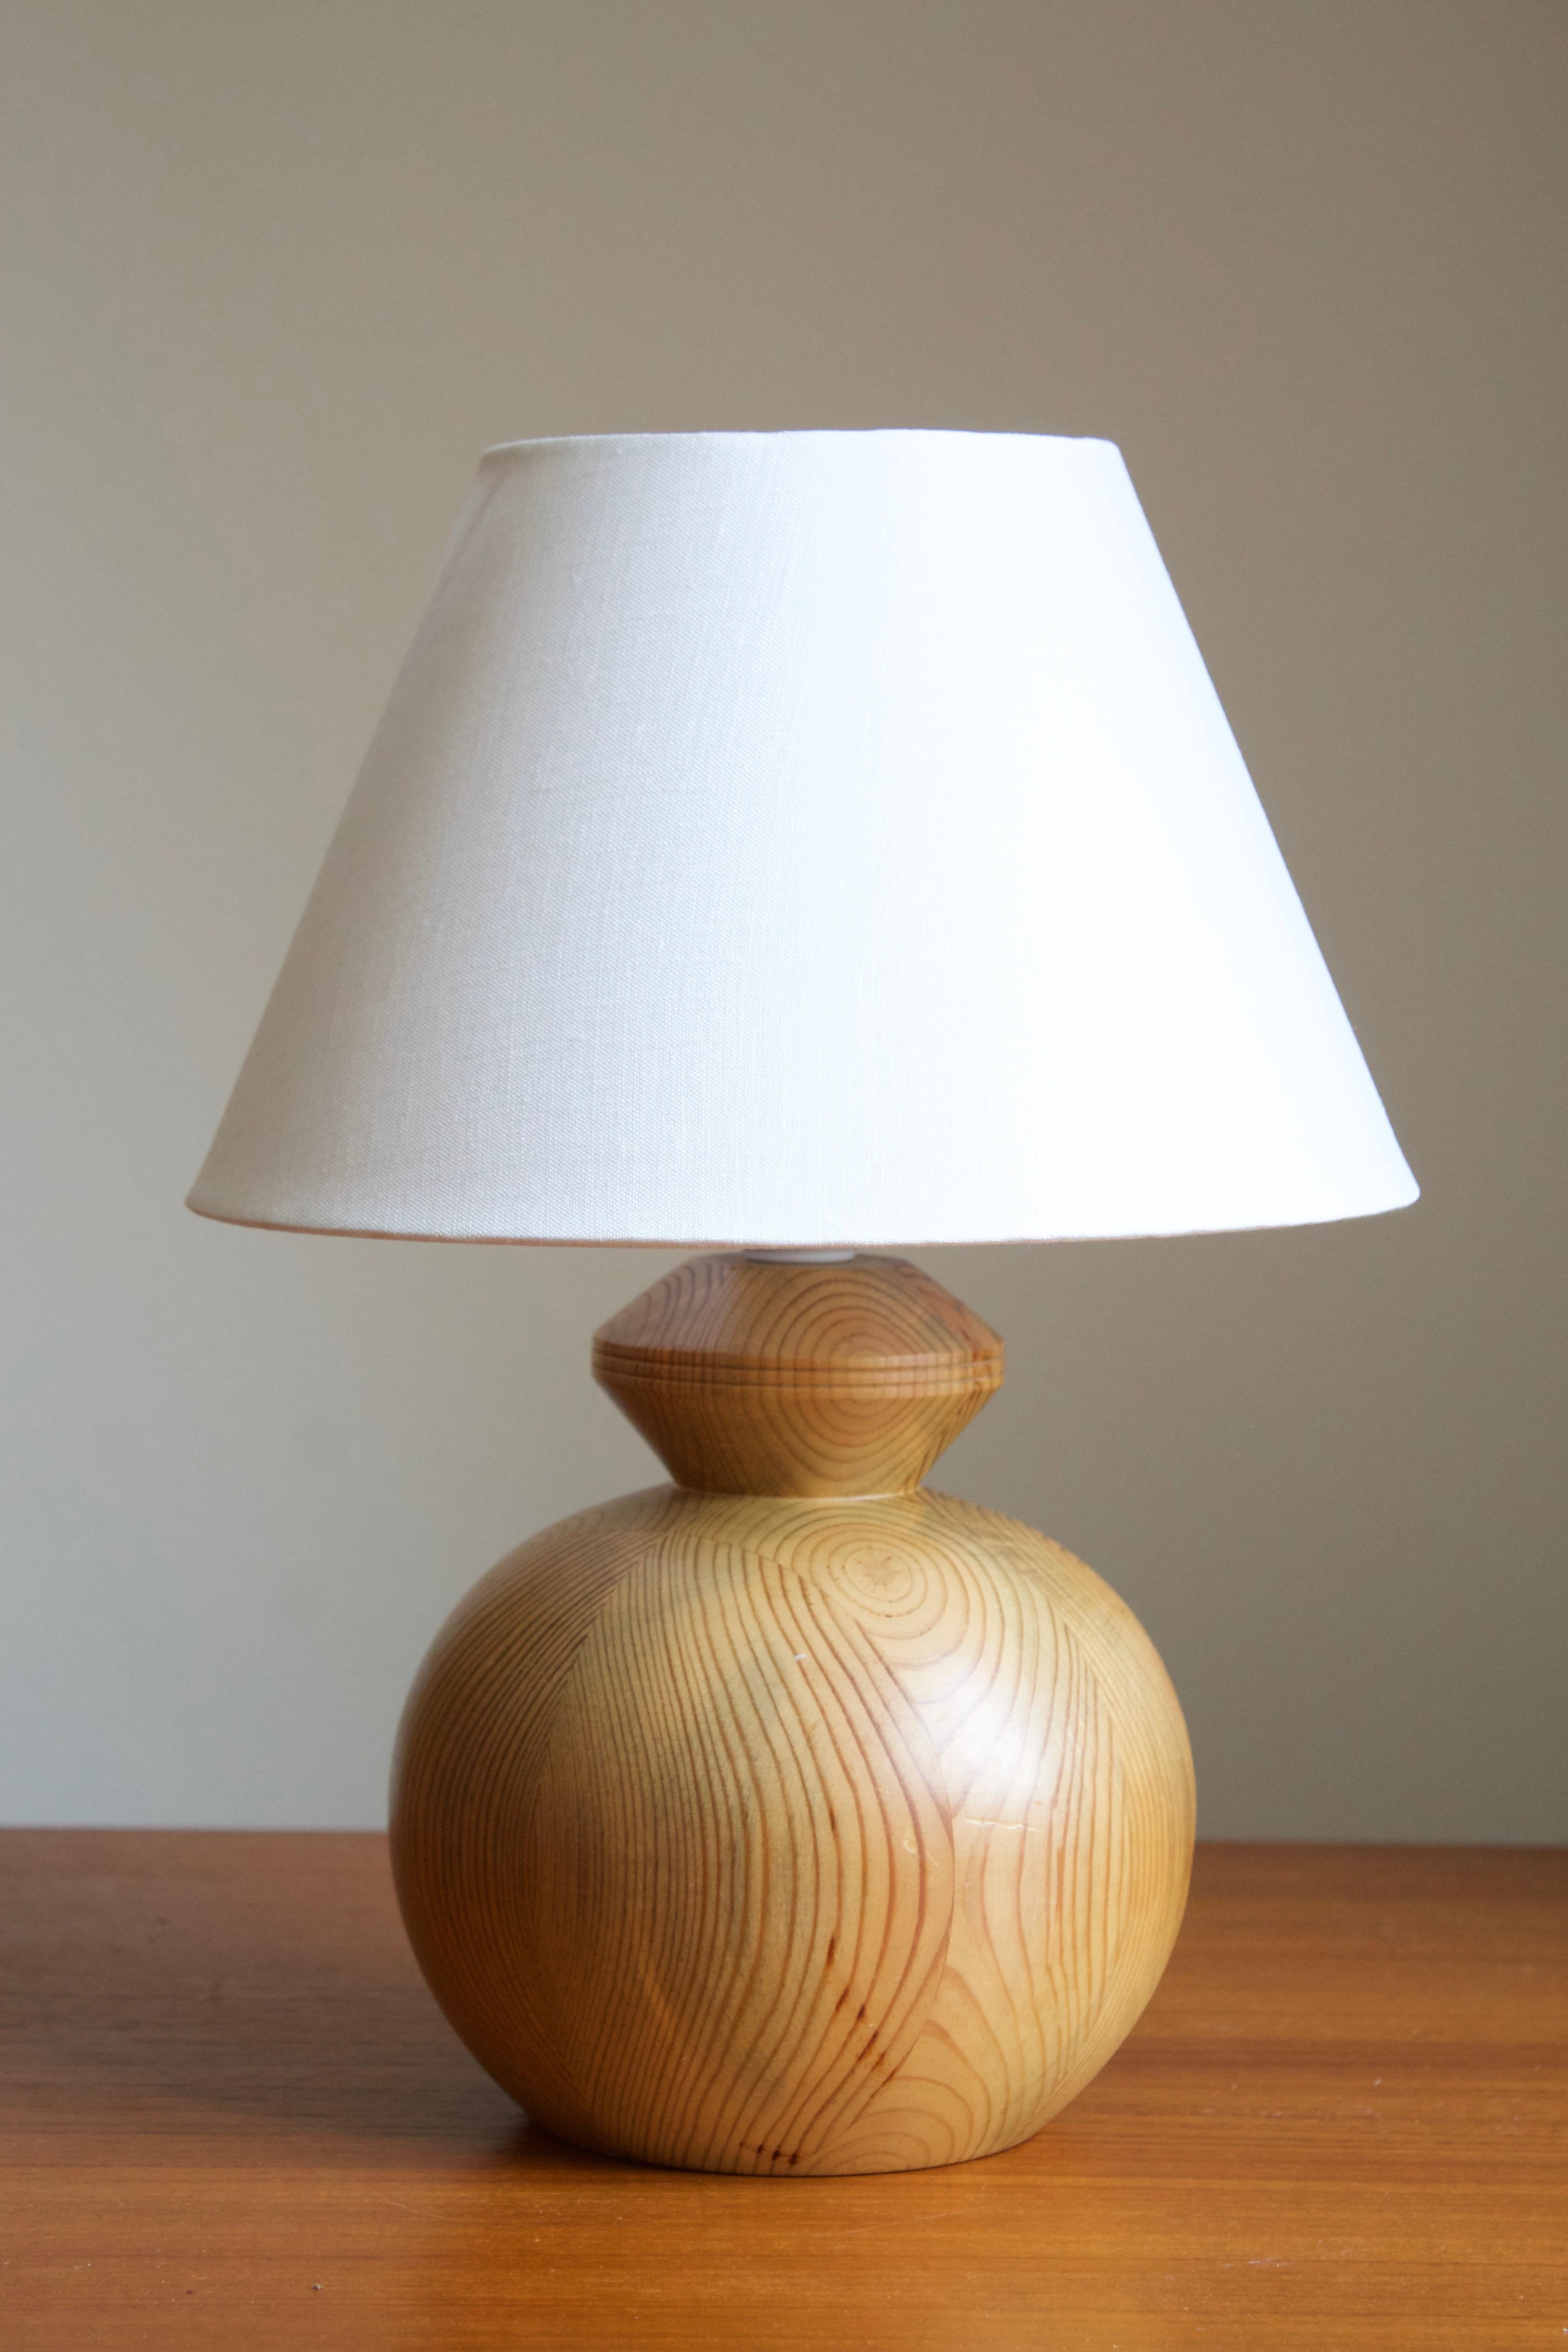 A table lamp. In solid pine. Signed NP and dated 1983.

Stated dimensions exclude lampshade, height includes socket. Sold without lampshade.